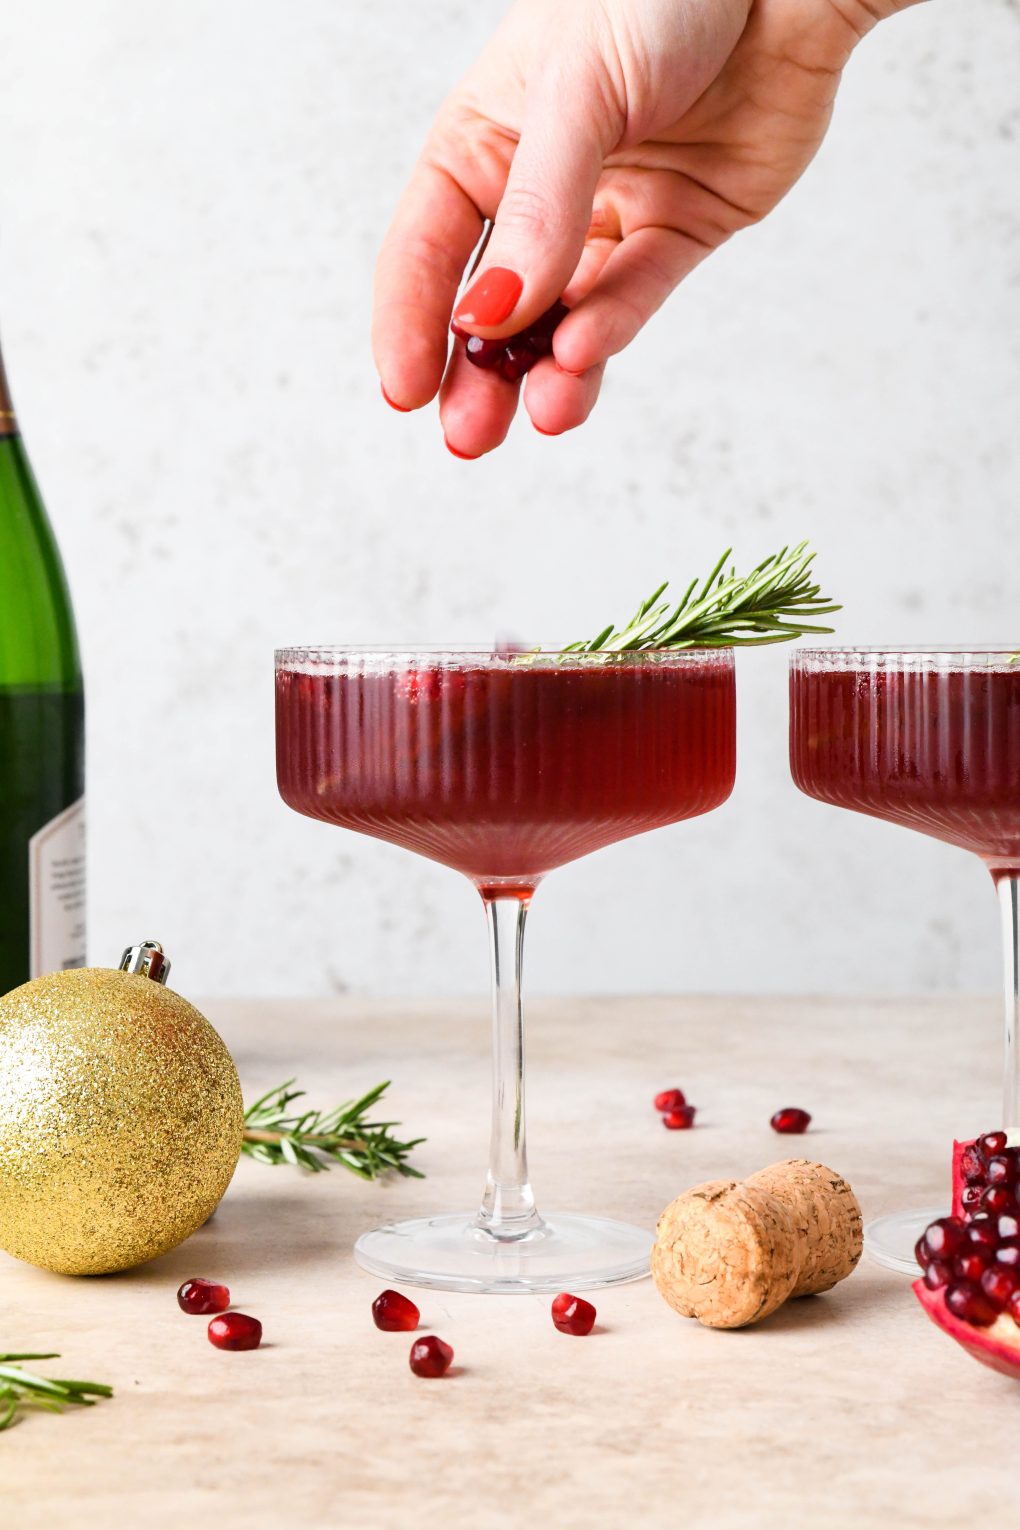 How to make Festive Pomegranate Champagne Cocktail: Dropping pomegranate seeds into the cocktail